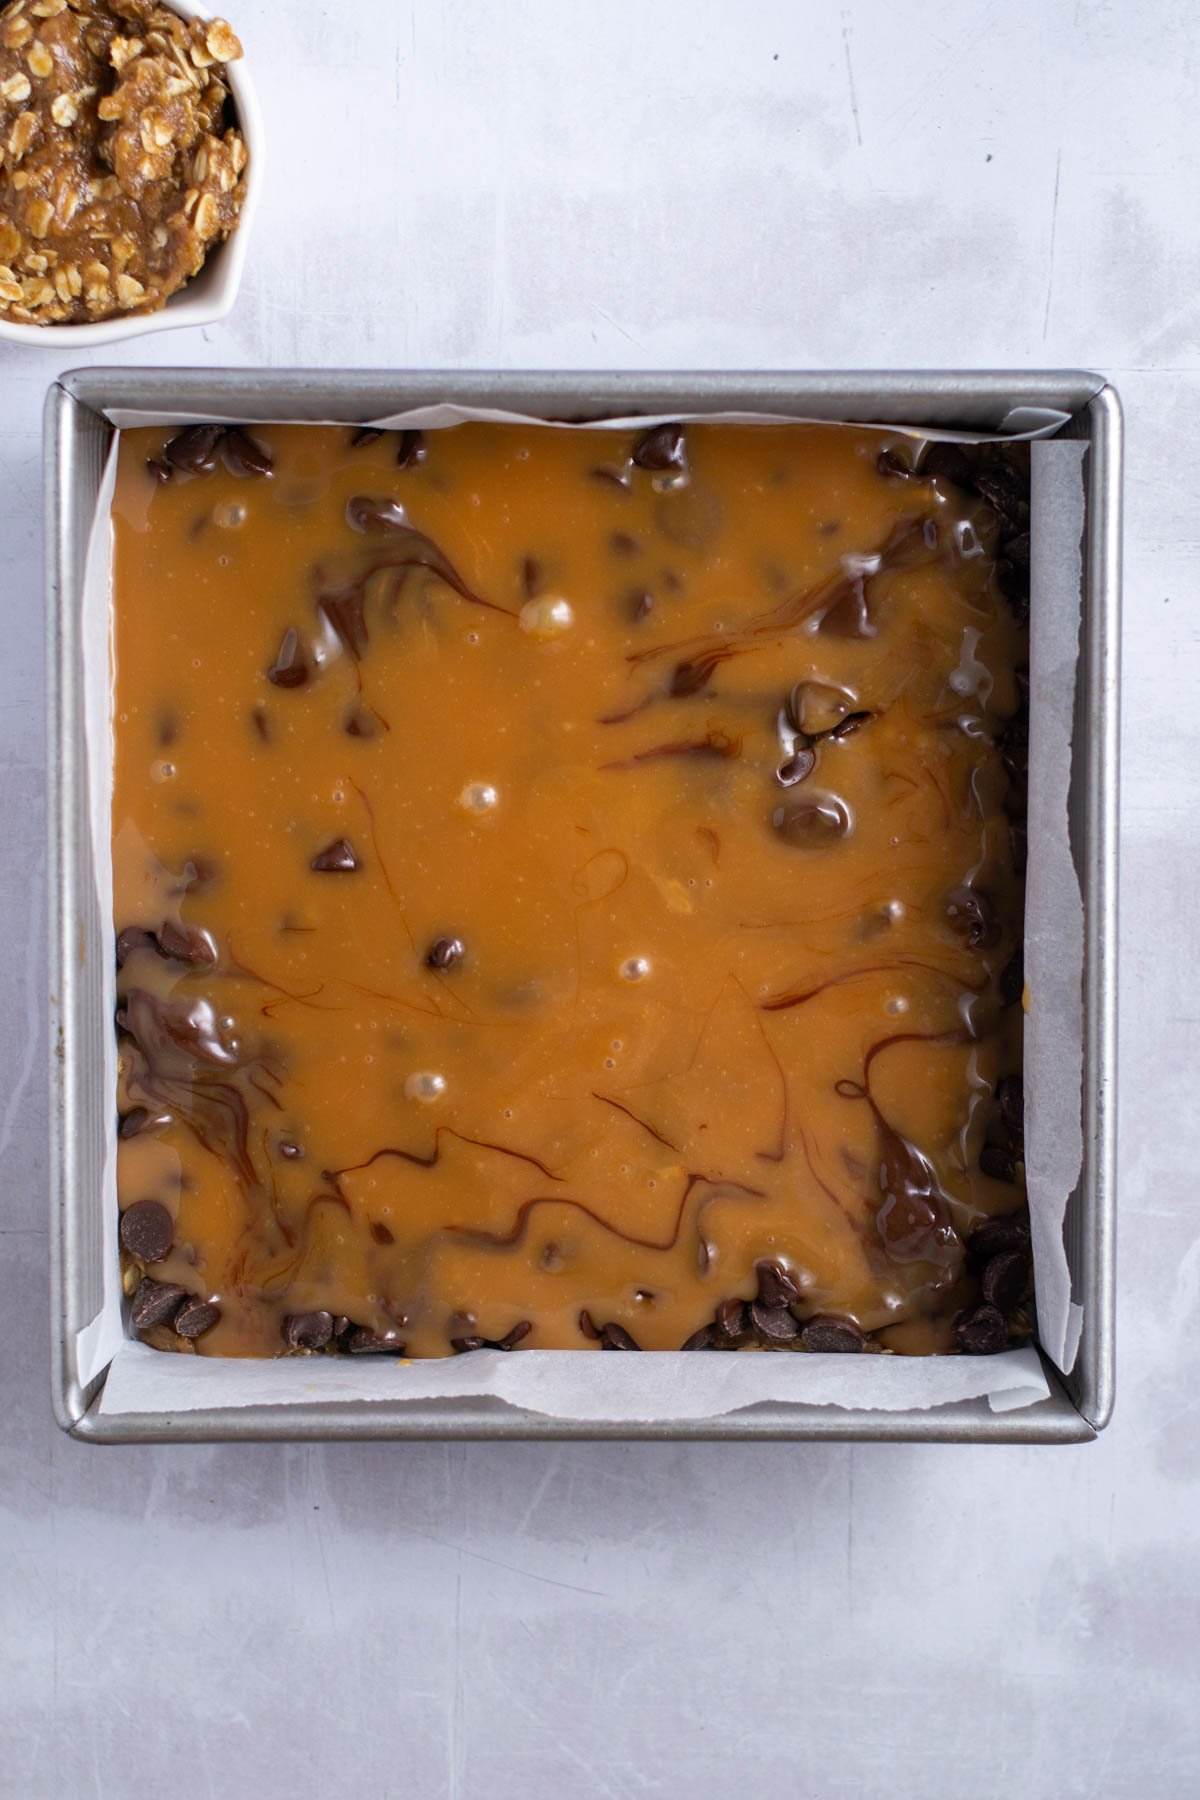 caramel sauce over chocolate chips in a baking square